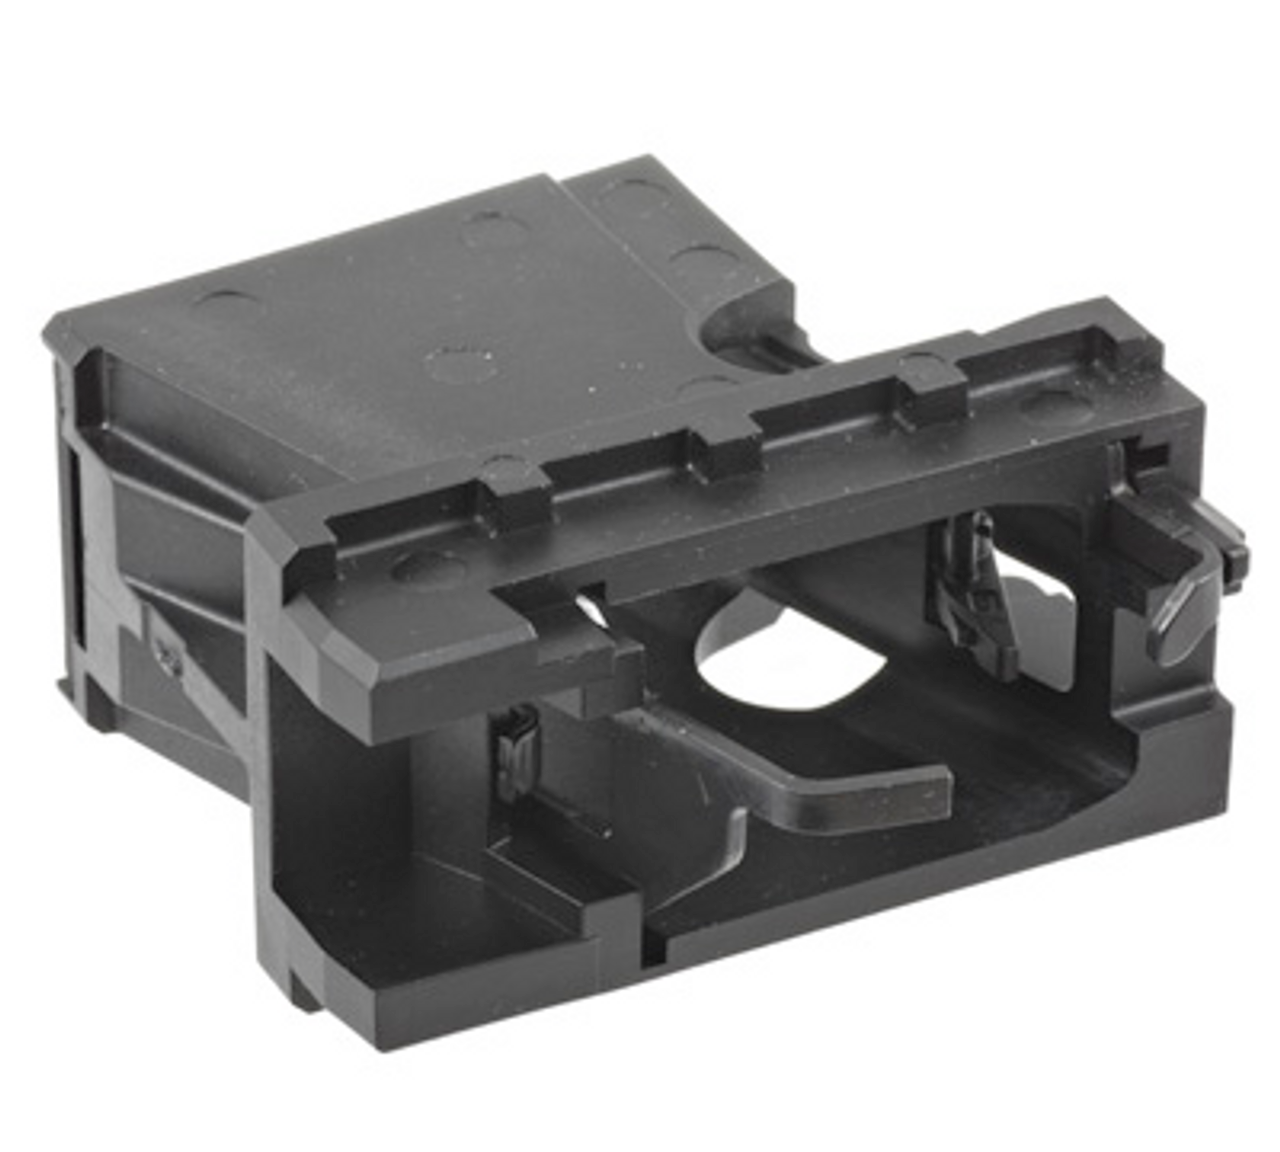 Ruger Magazine Well Insert Assemby, Glass Filled Polymer, for PC Carbine